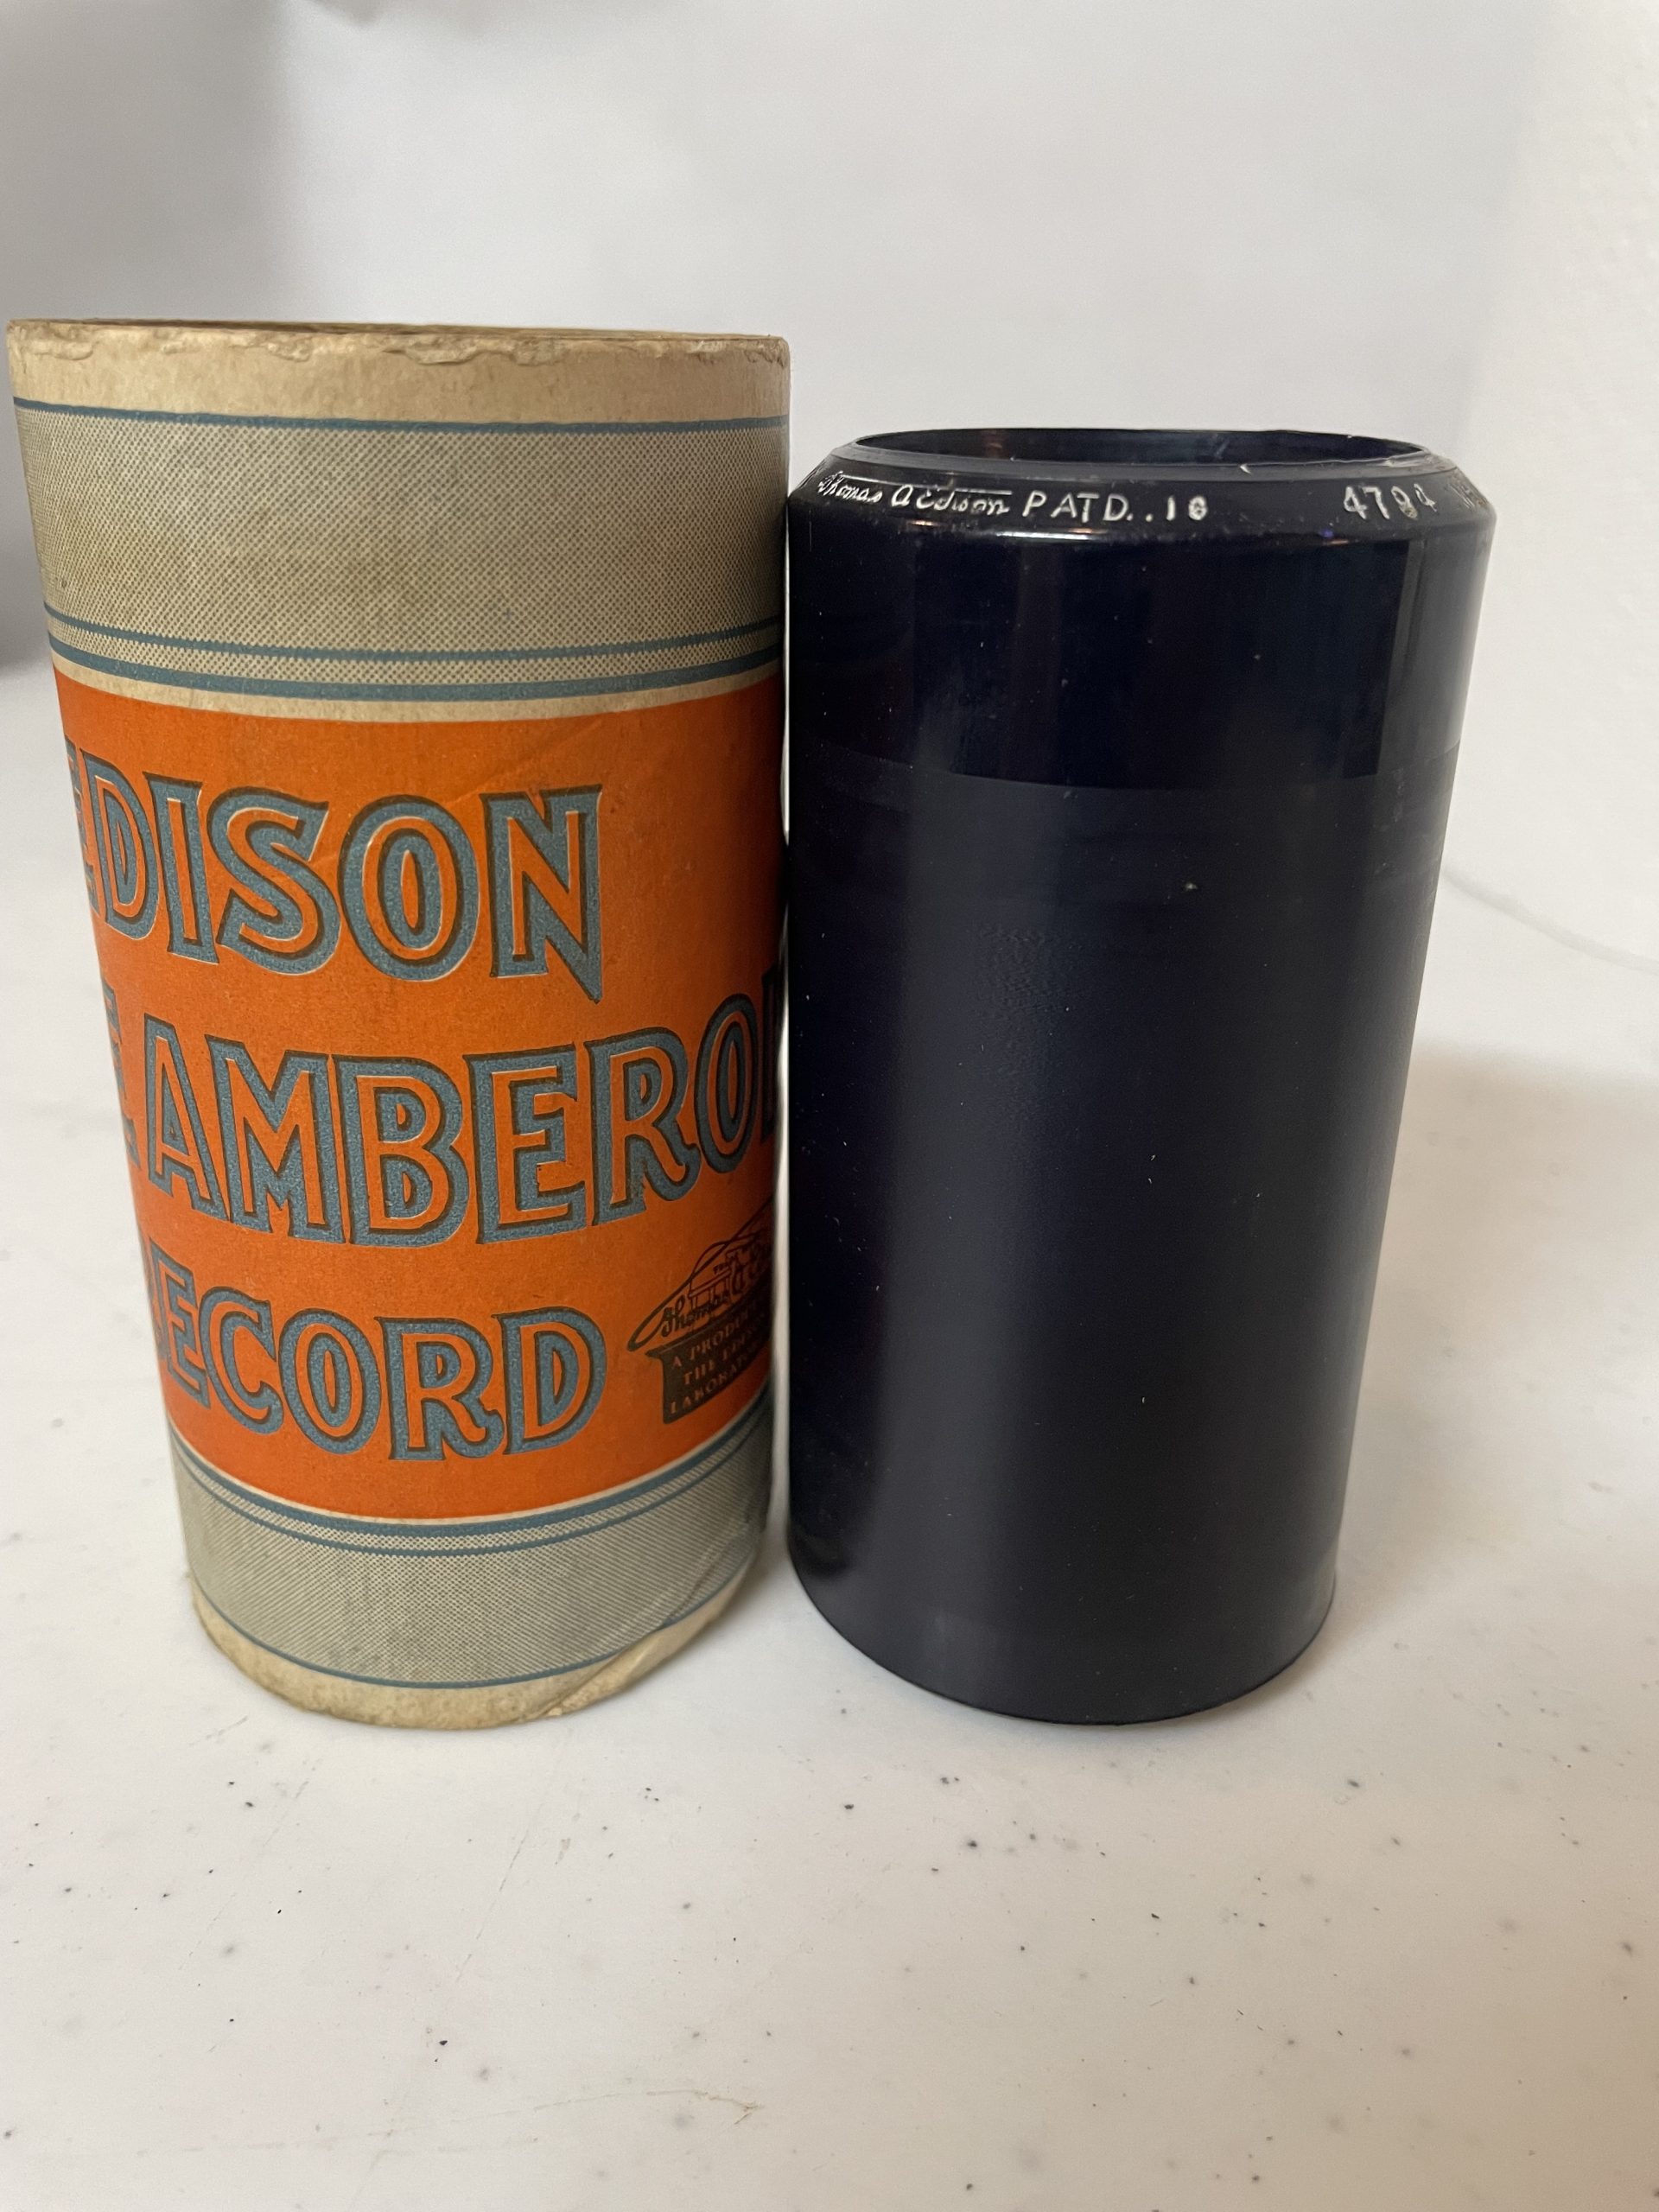 Edison 4 minute Cylinder…”Everything is Hunky Dory down in Honky Tonky Town”